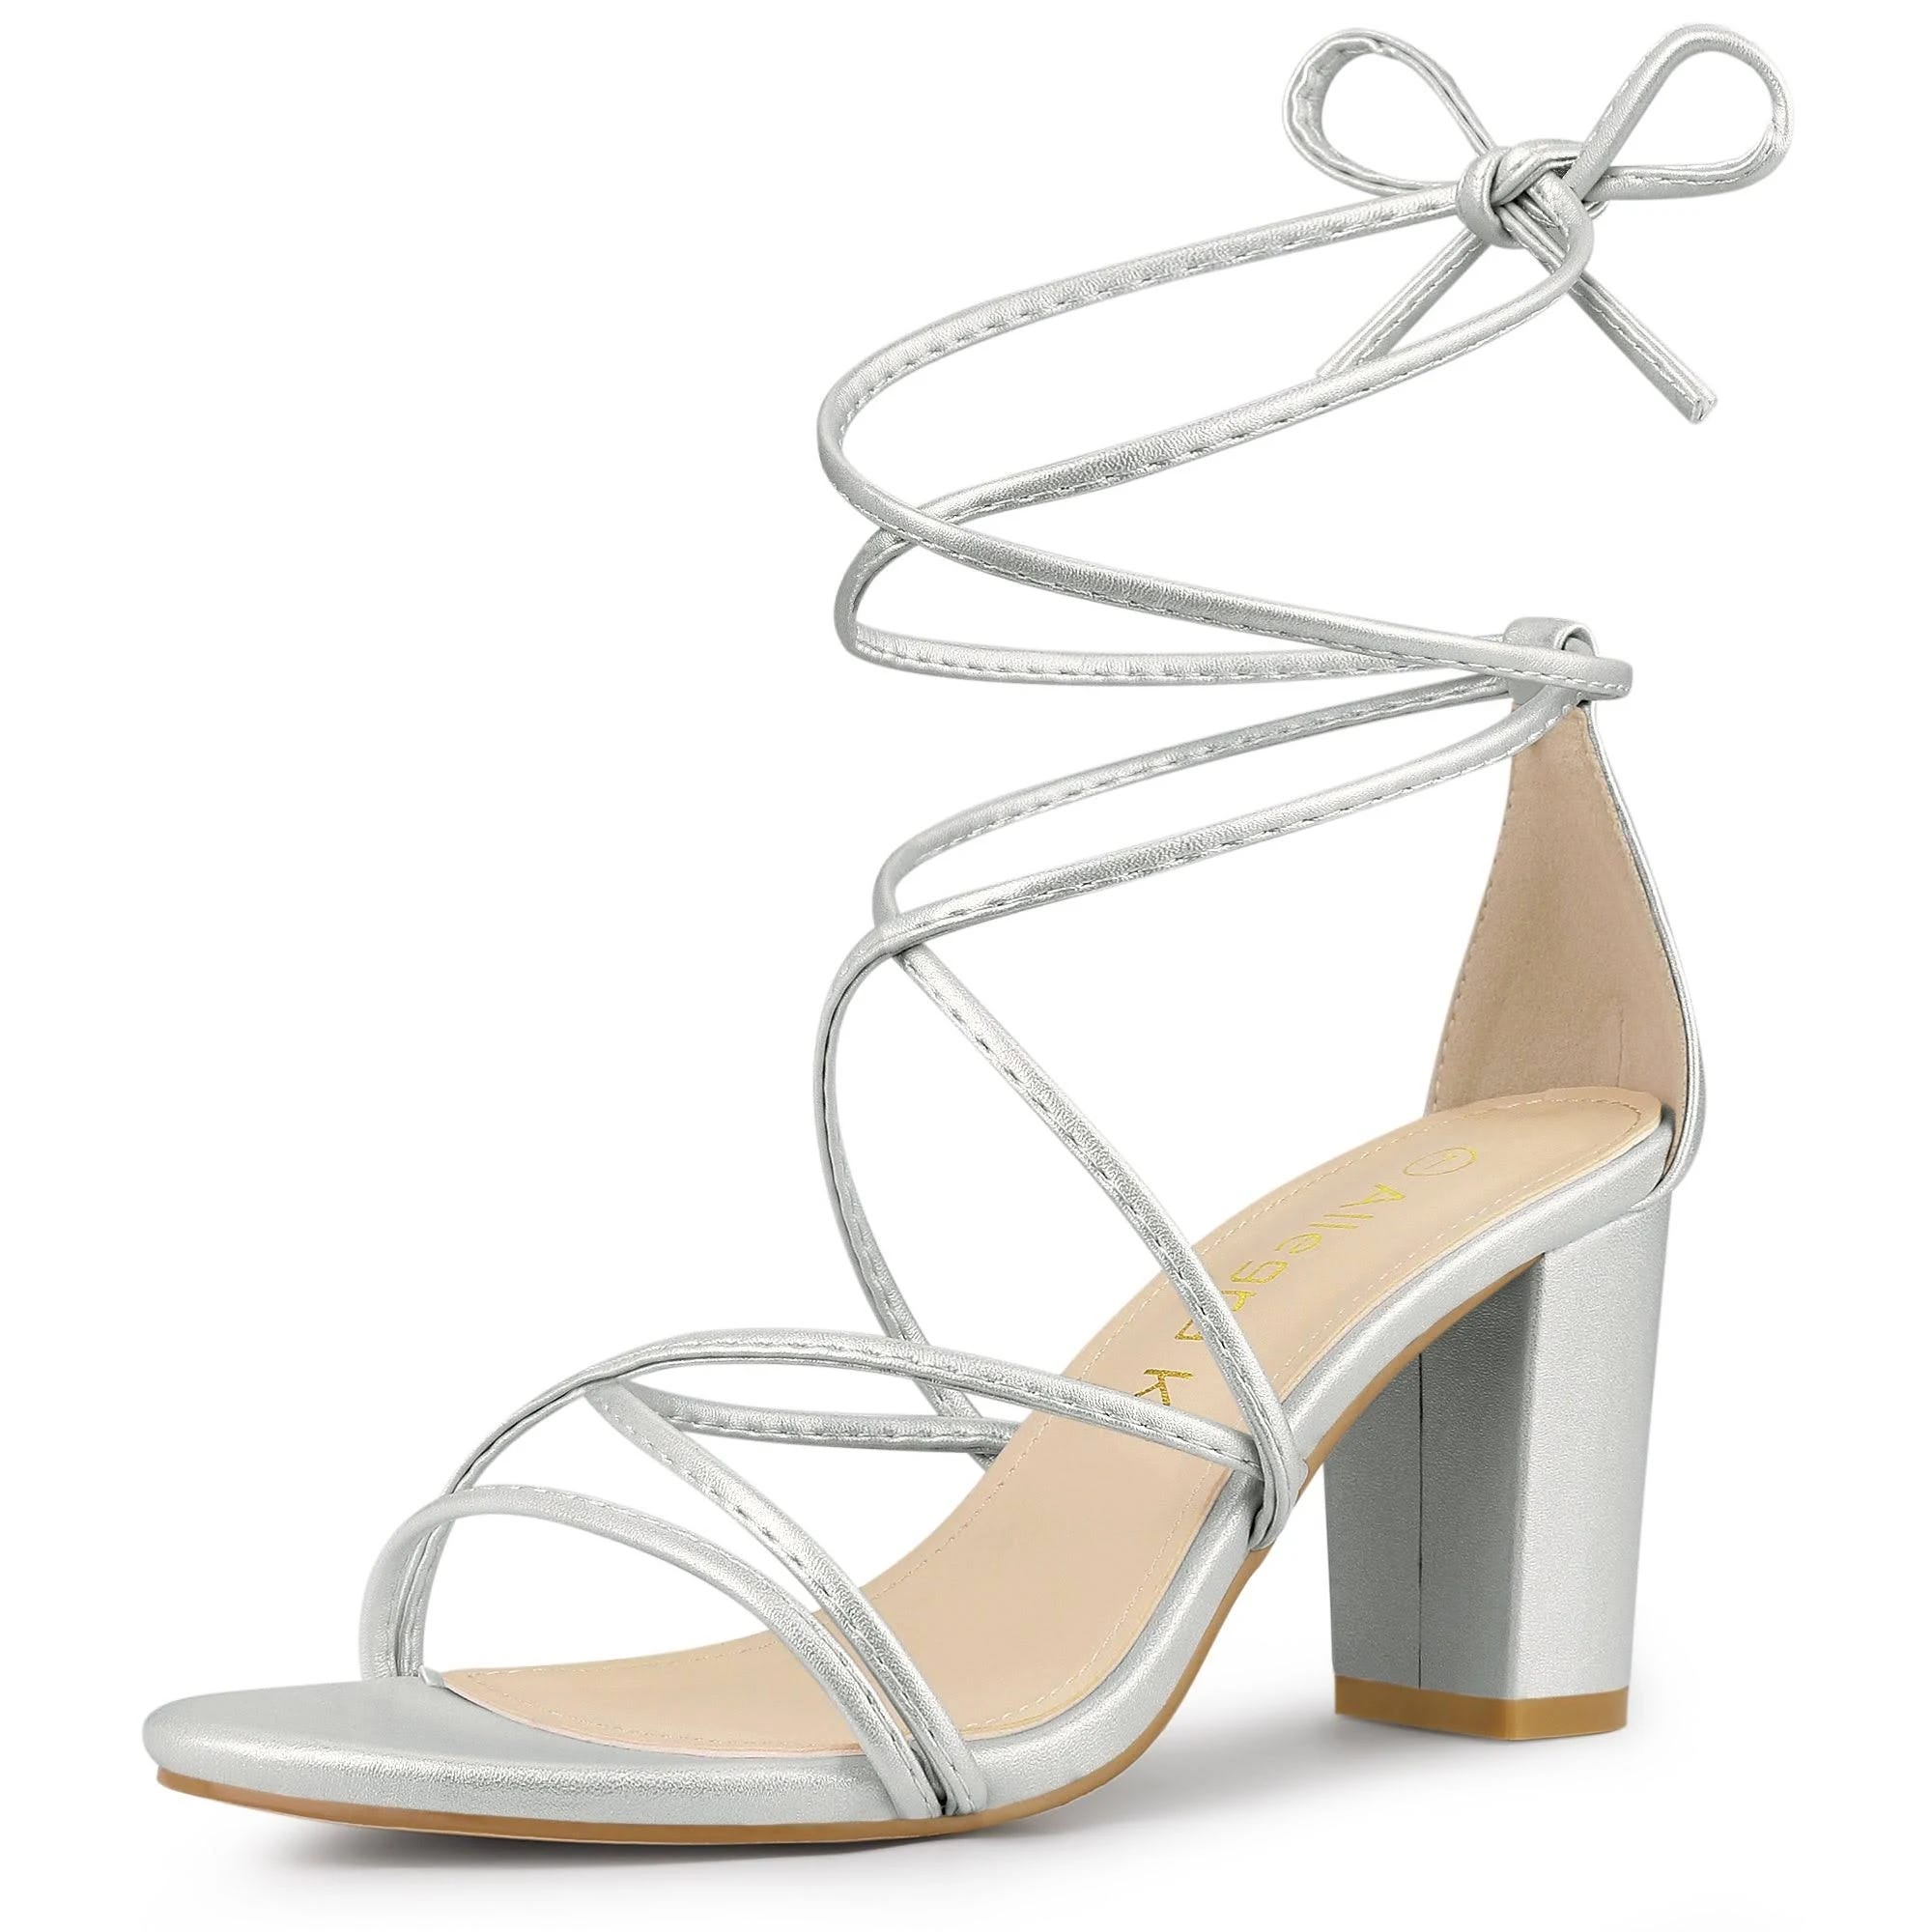 Strappy Silver Chunky Heel Sandals for a Stylish Look | Image